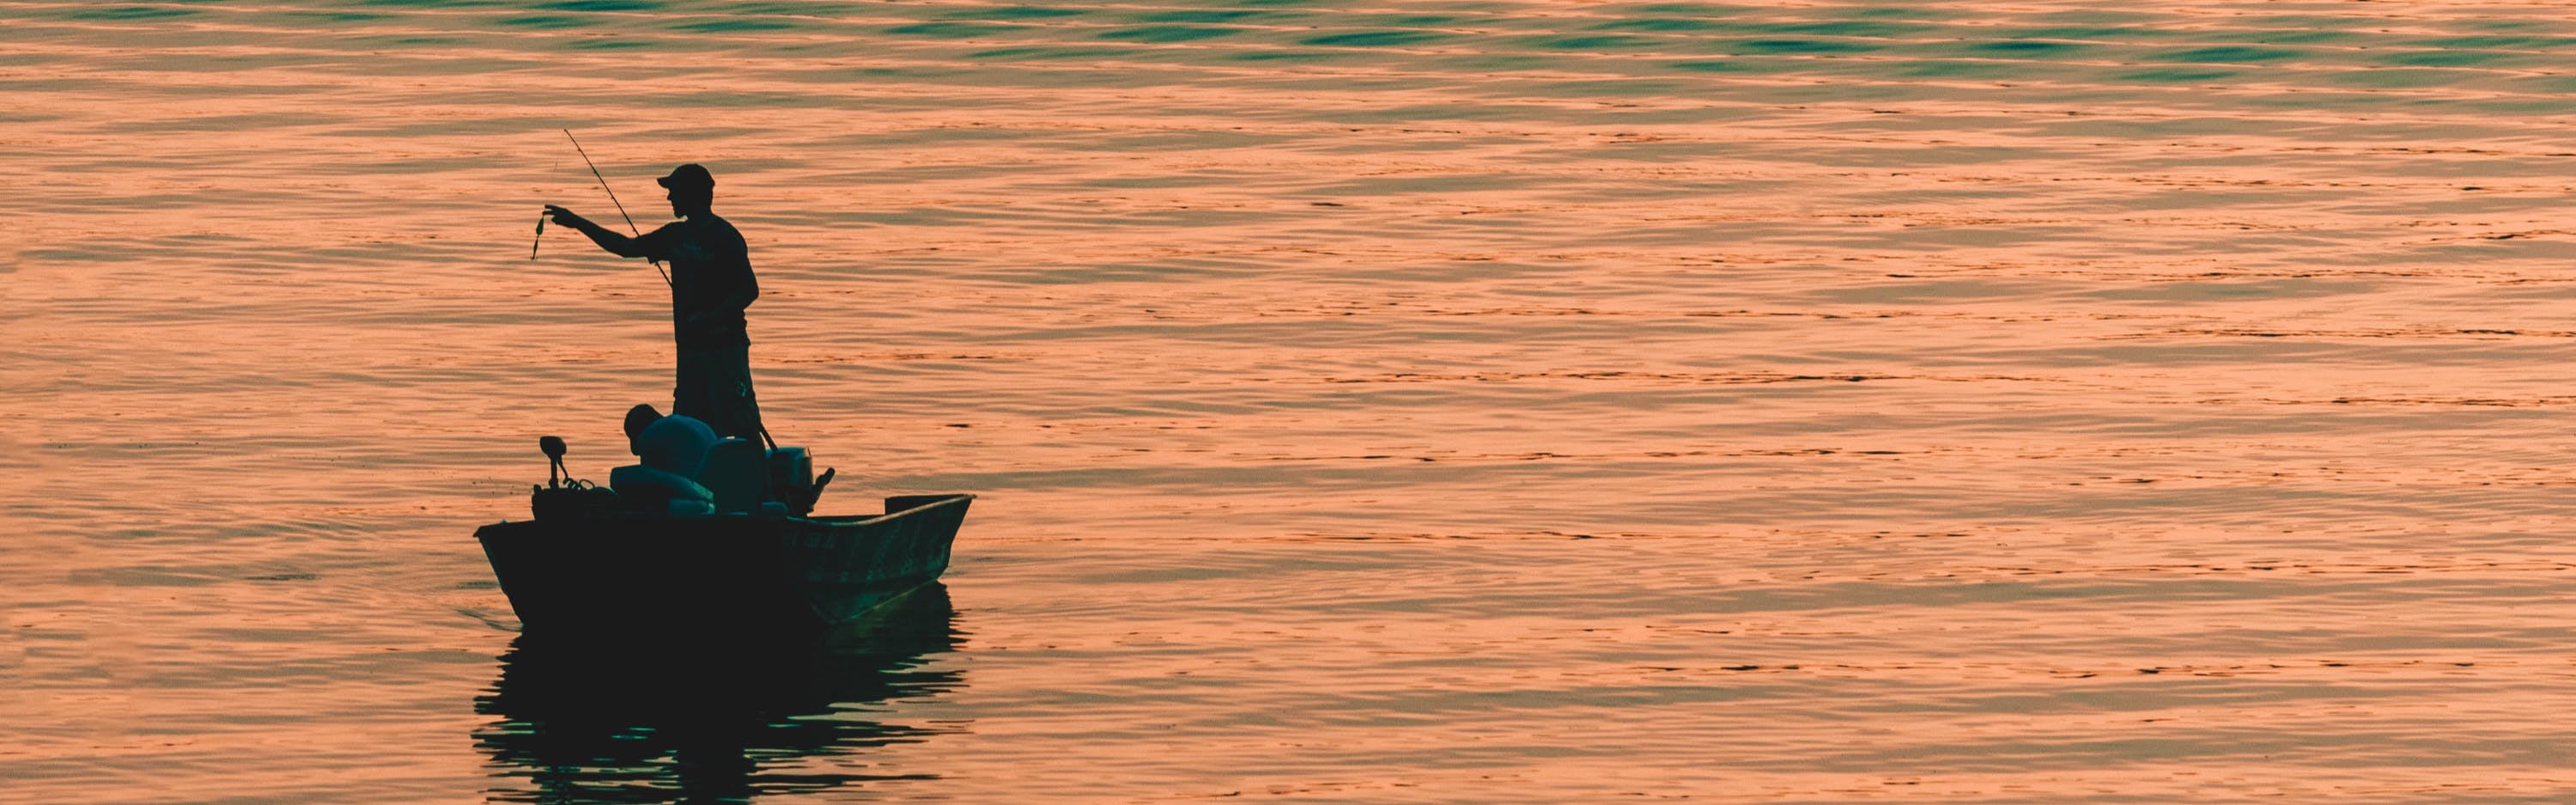 Someone preps their line while standing in a boat. The scene is silhouetted against a lake full of ripples and peach-colored in the setting sun.